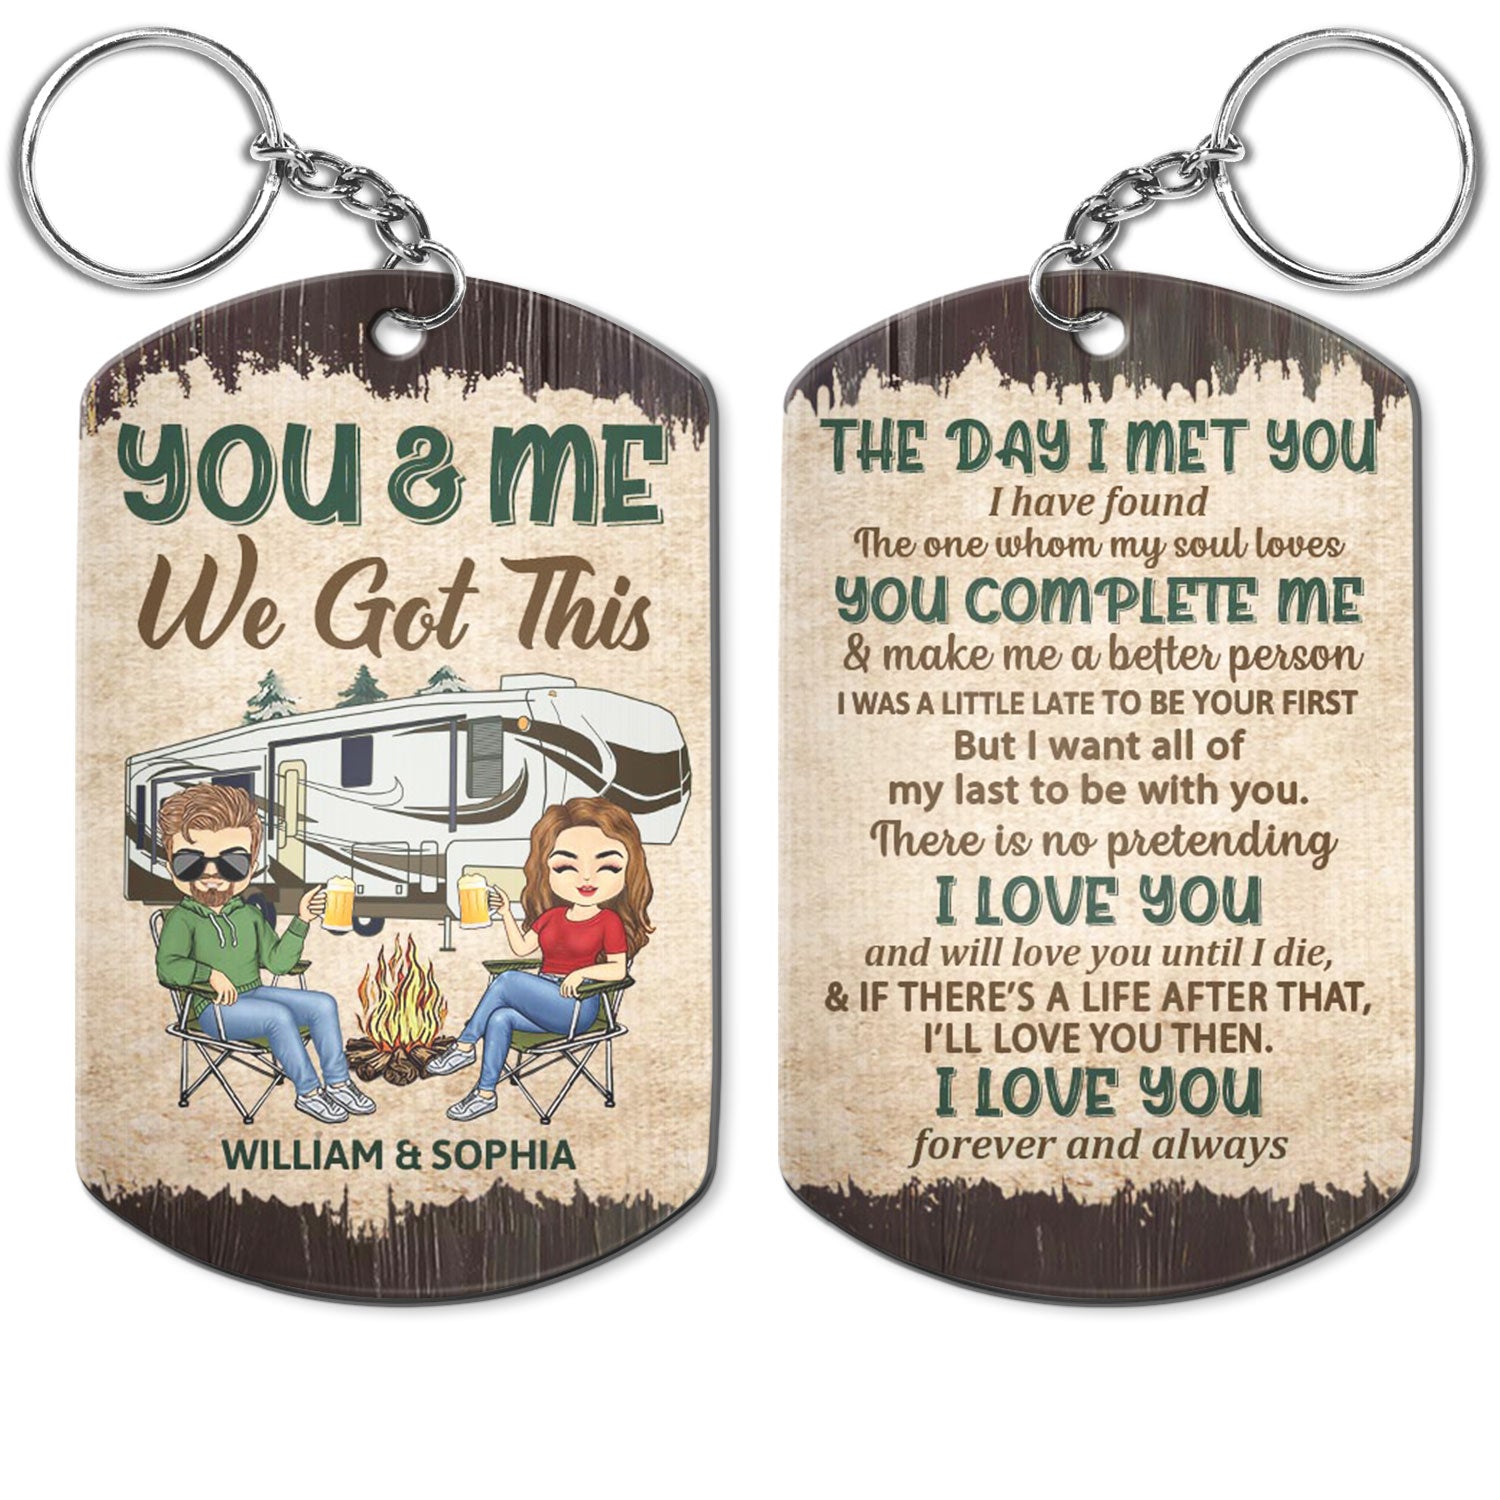 The Day I Met You - Anniversary, Loving Gifts For Couples, Husband, Wife, Camping Lovers - Personalized Aluminum Keychain